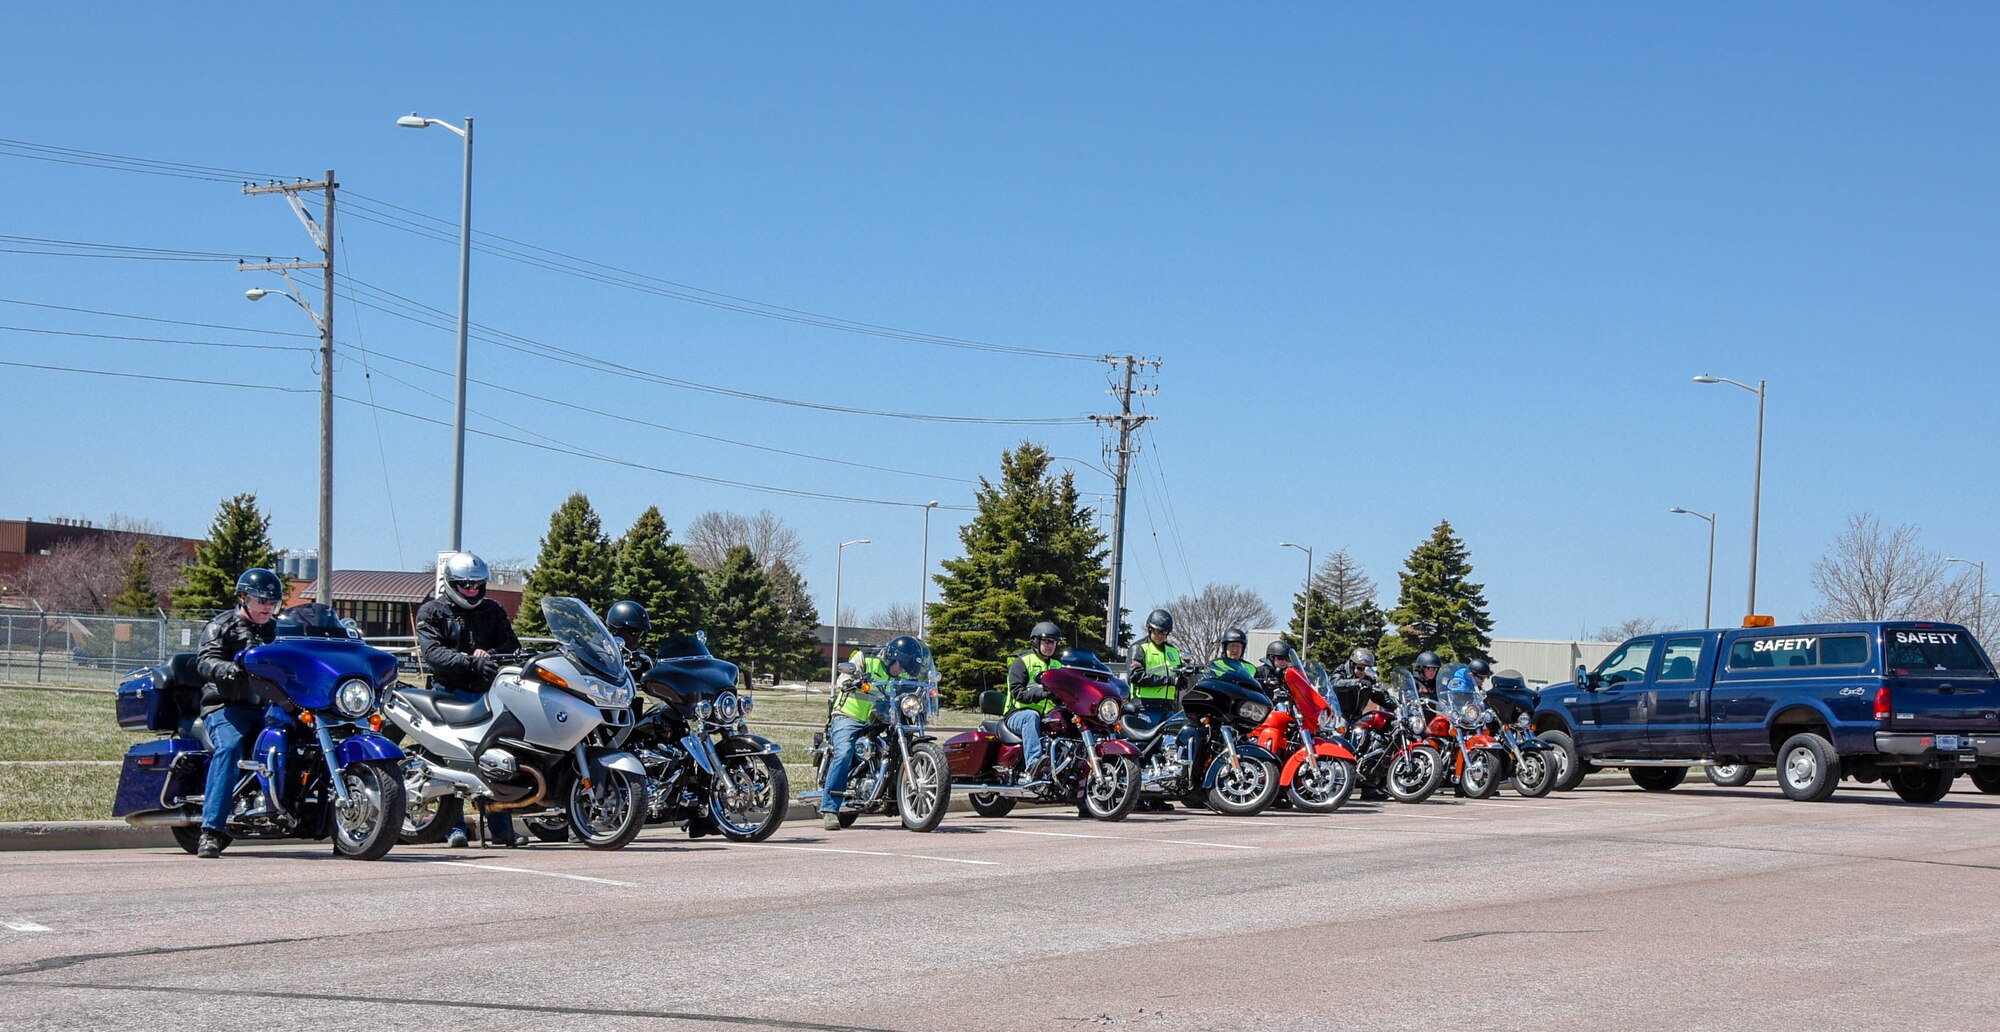 South Dakota Air National Guard motorcycle riders prepare to depart for the mentorship ride after participating in the annual motorcycle training at Joe Foss Field, S.D.